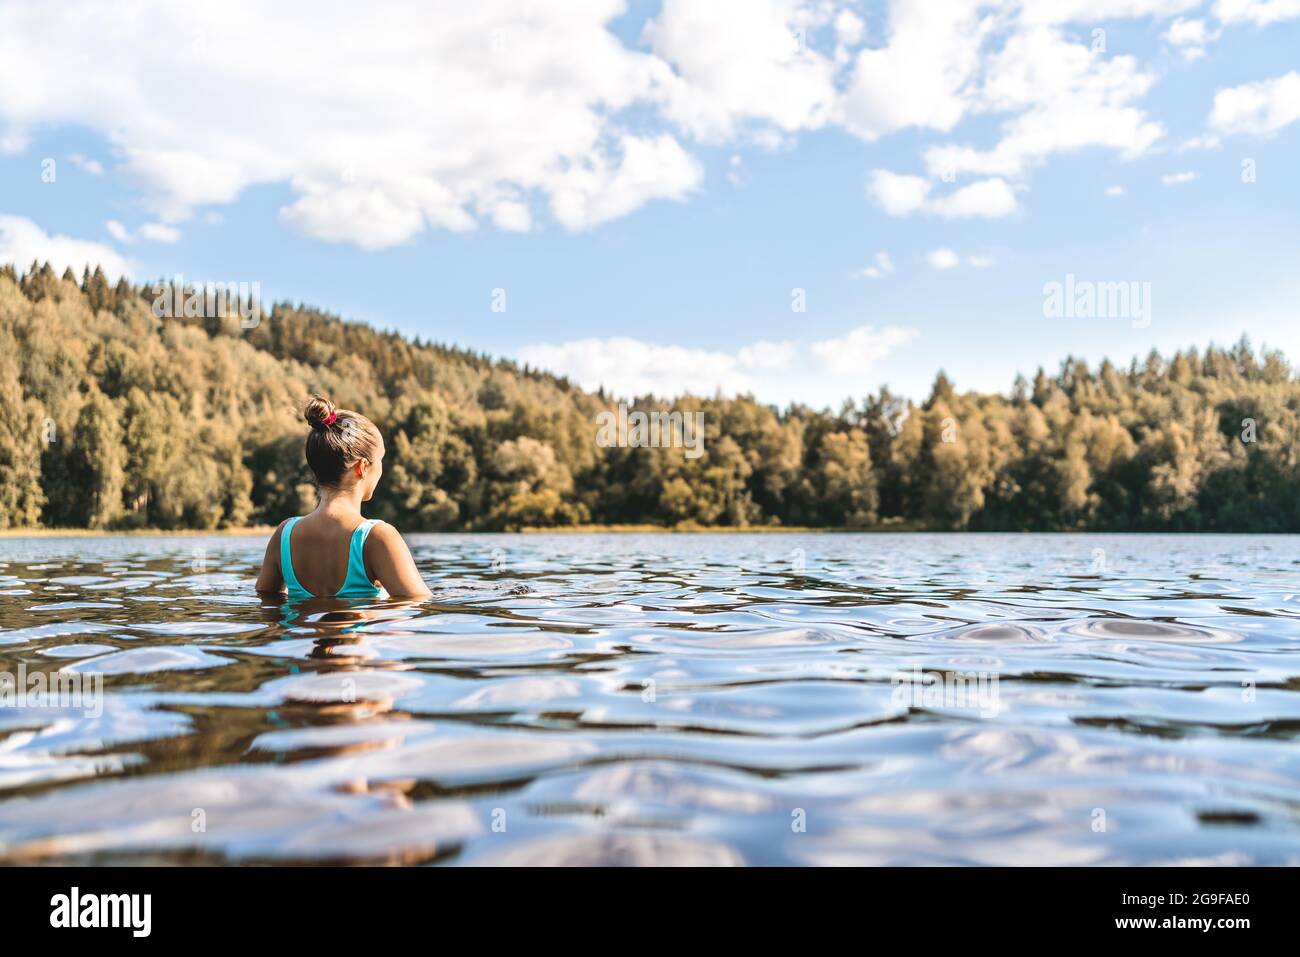 Lake in Finland. Woman swimming. Finnish nature, water and serene sky in summer. Outdoor bathing in Scandinavia after sauna. Green forest and beach. Stock Photo